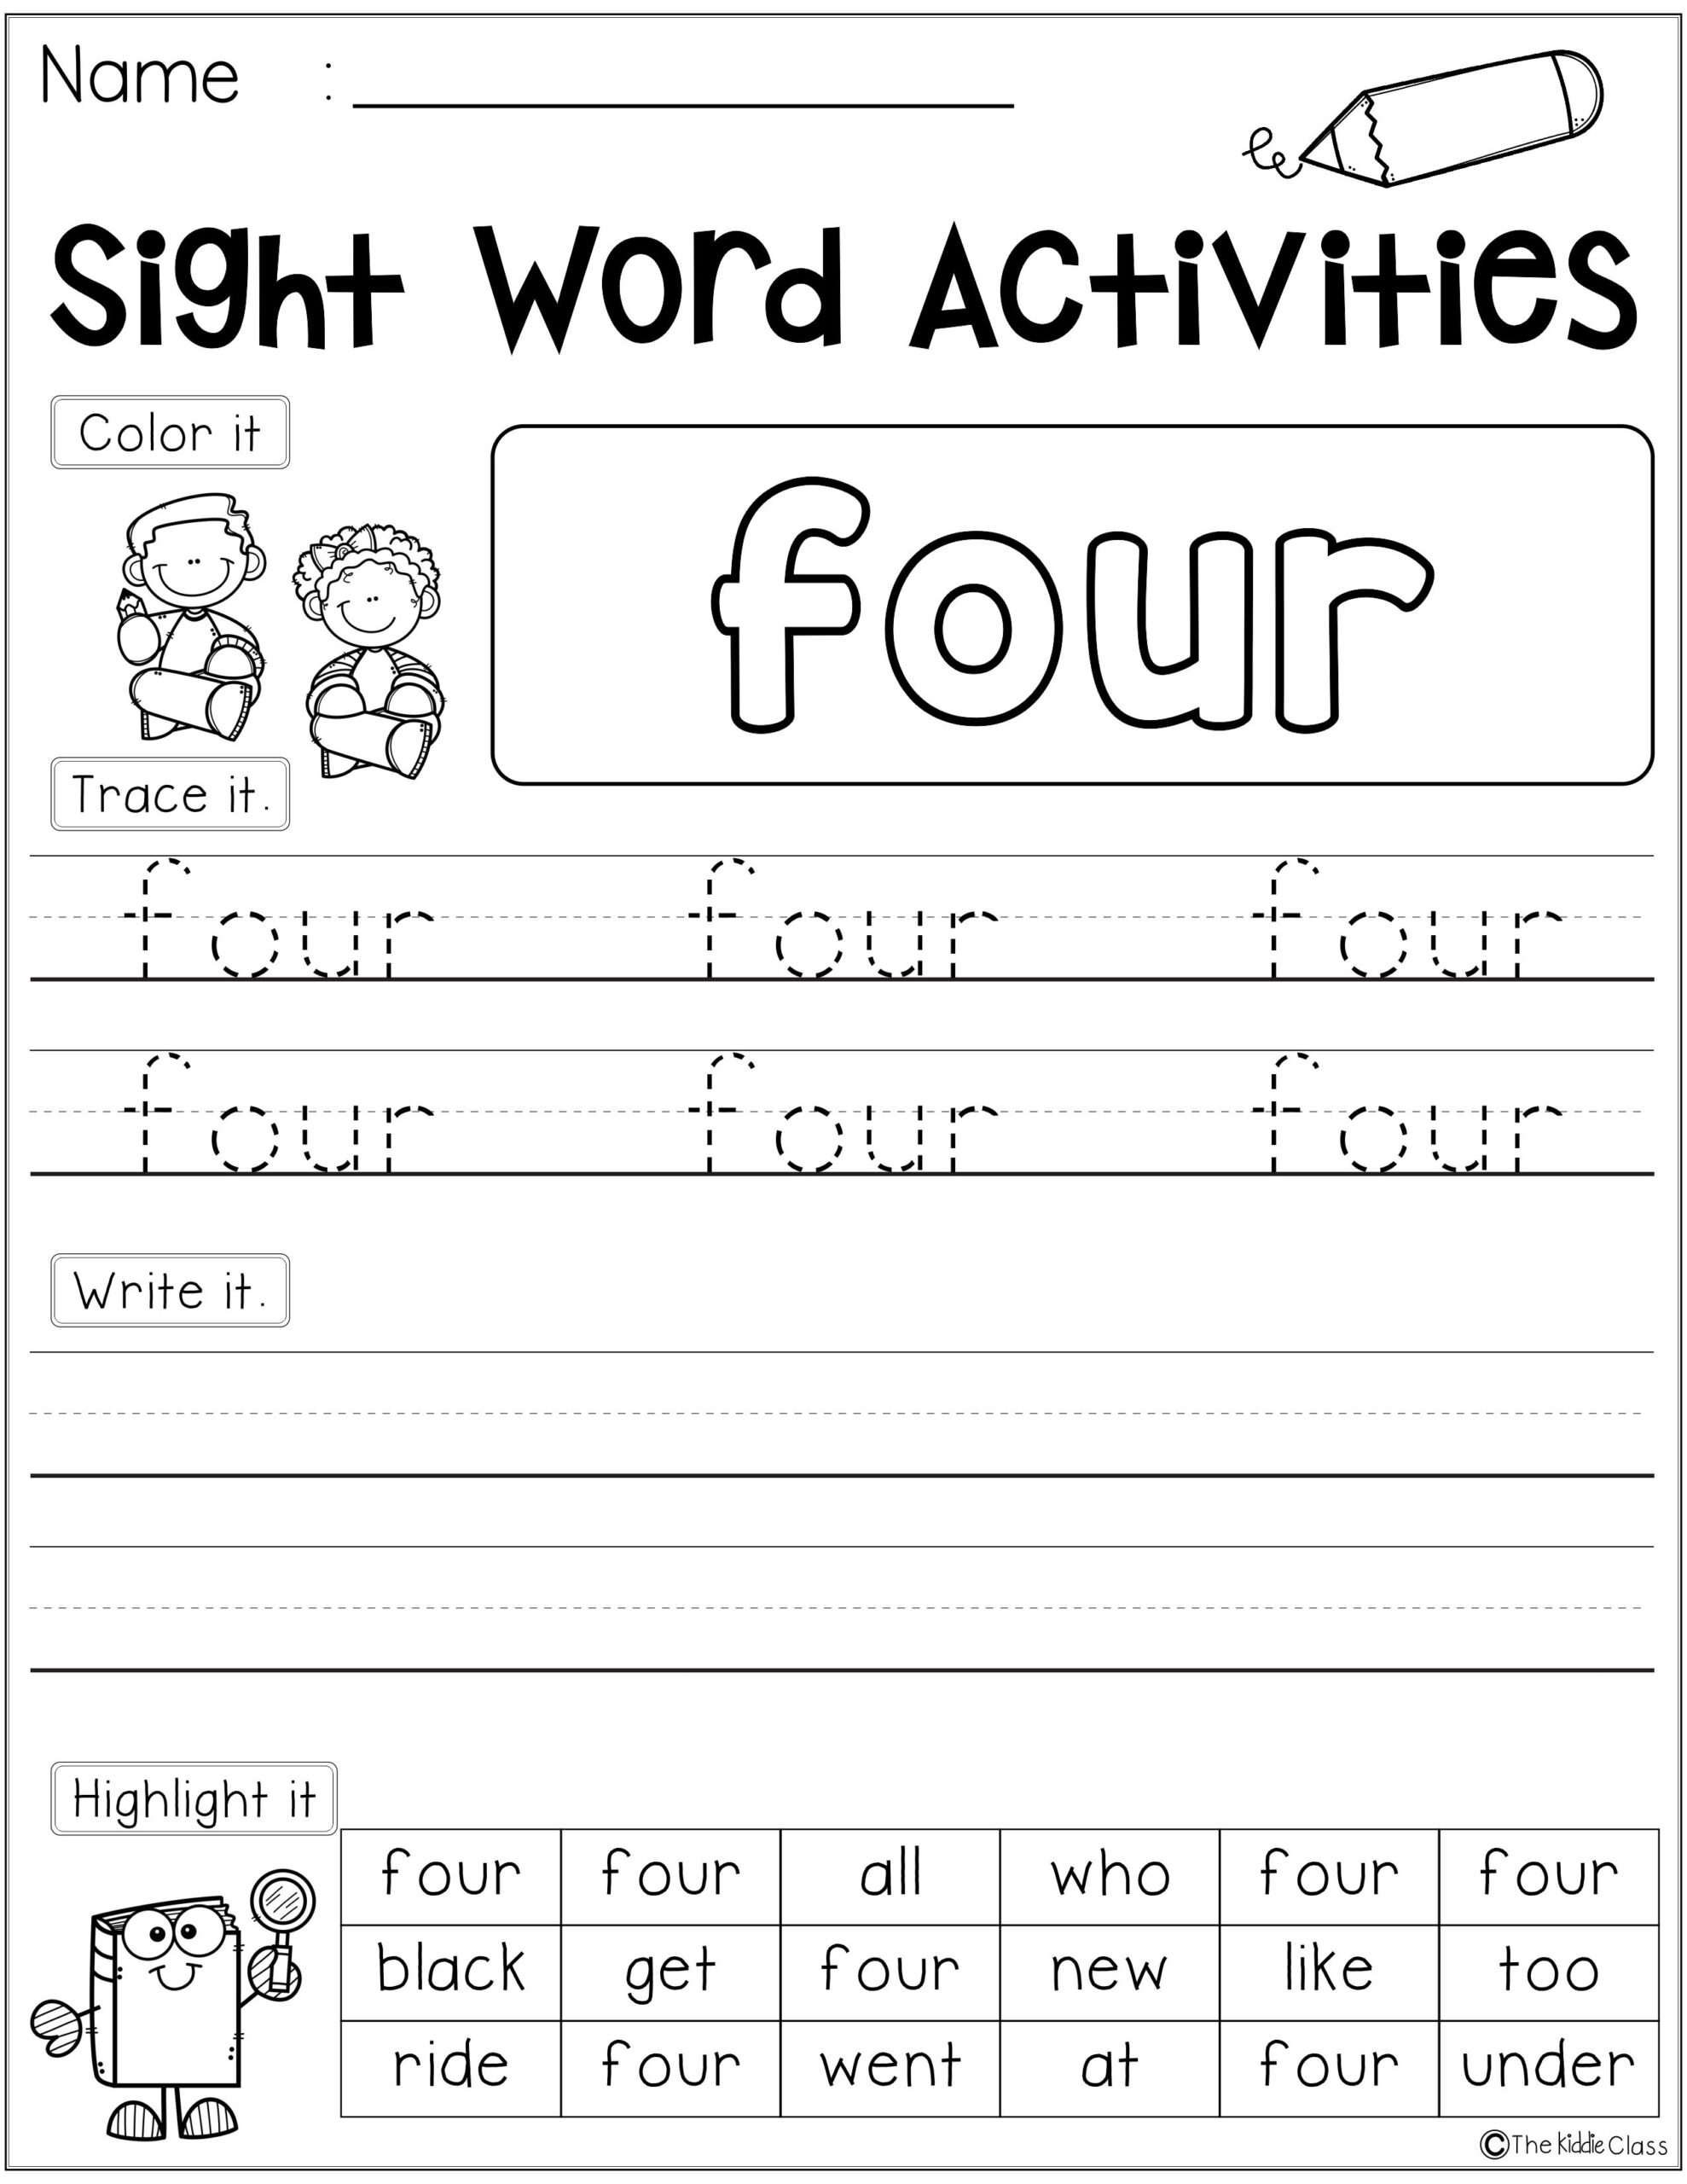 Free Sight Word Activities. There Are 10 Pages Of Sight Word